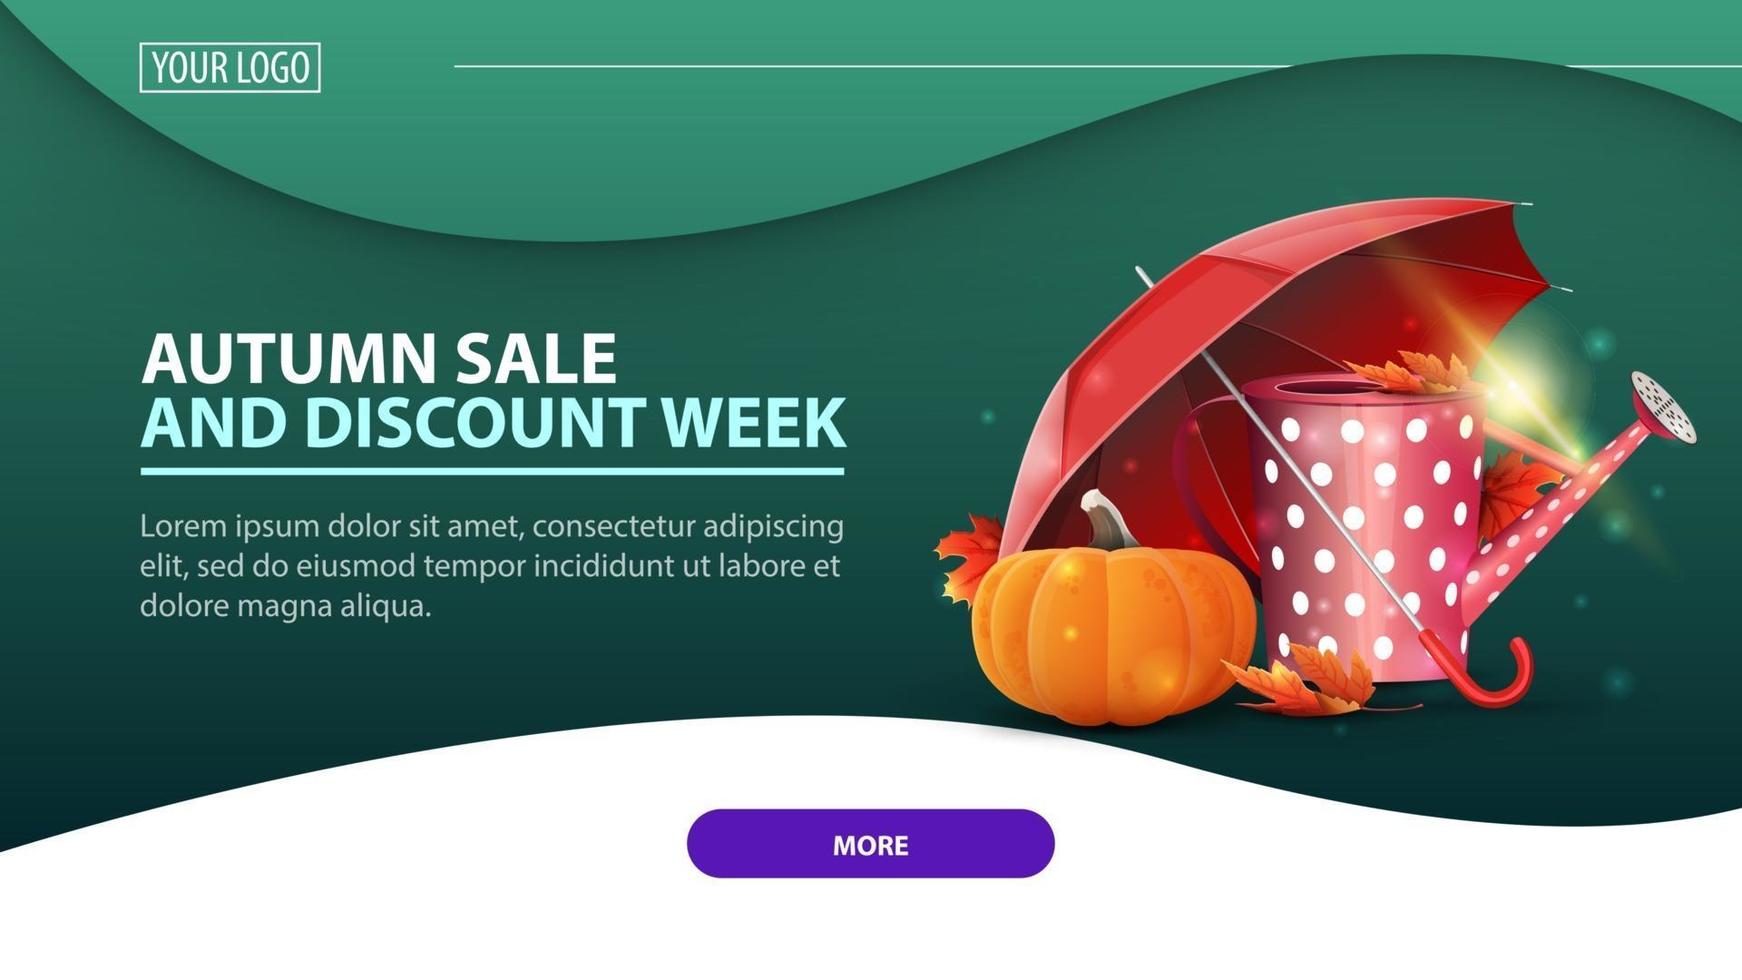 Autumn sale and discount week, banner with garden watering can vector